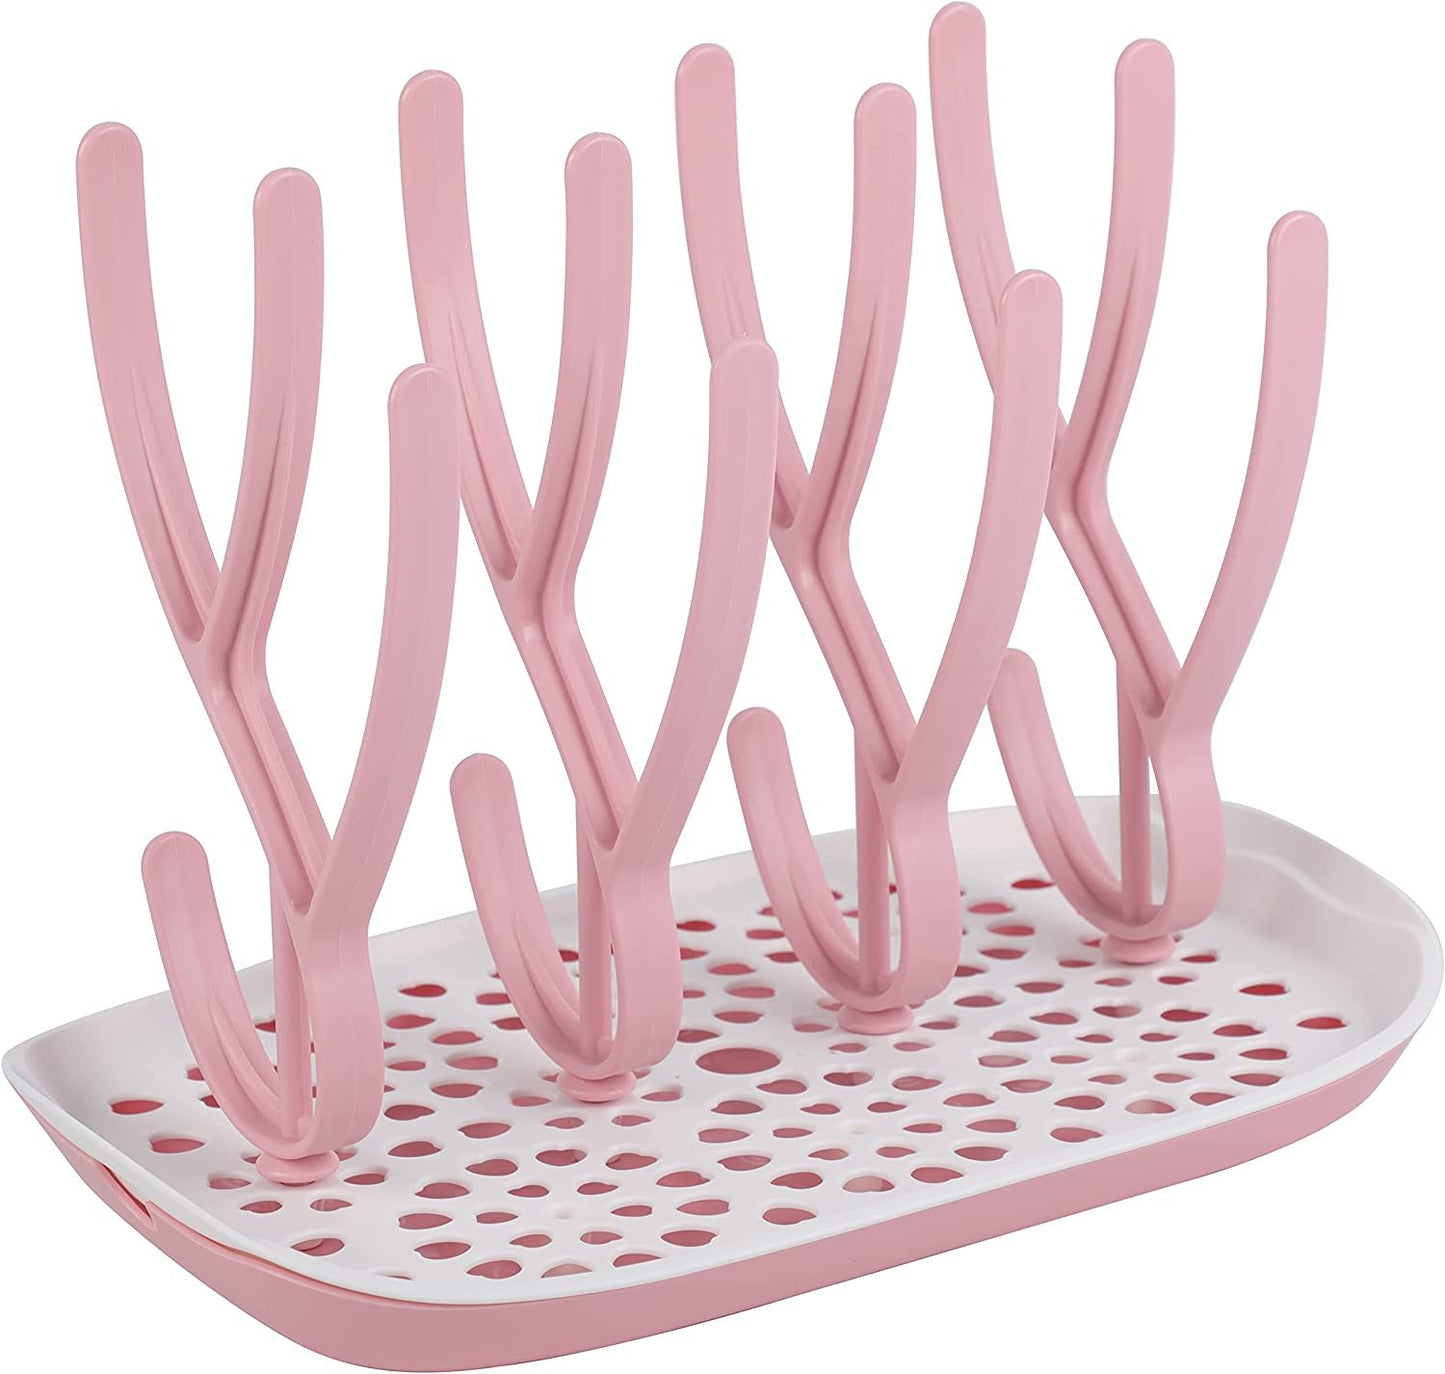 ToeZee Baby Bottle Drying Rack Space Saving Countertop Baby Bottle Holder, Drying Rack for Baby Bottles Accessories - Stores Up to 12 Bottles, Dishwasher Safe (Pink)